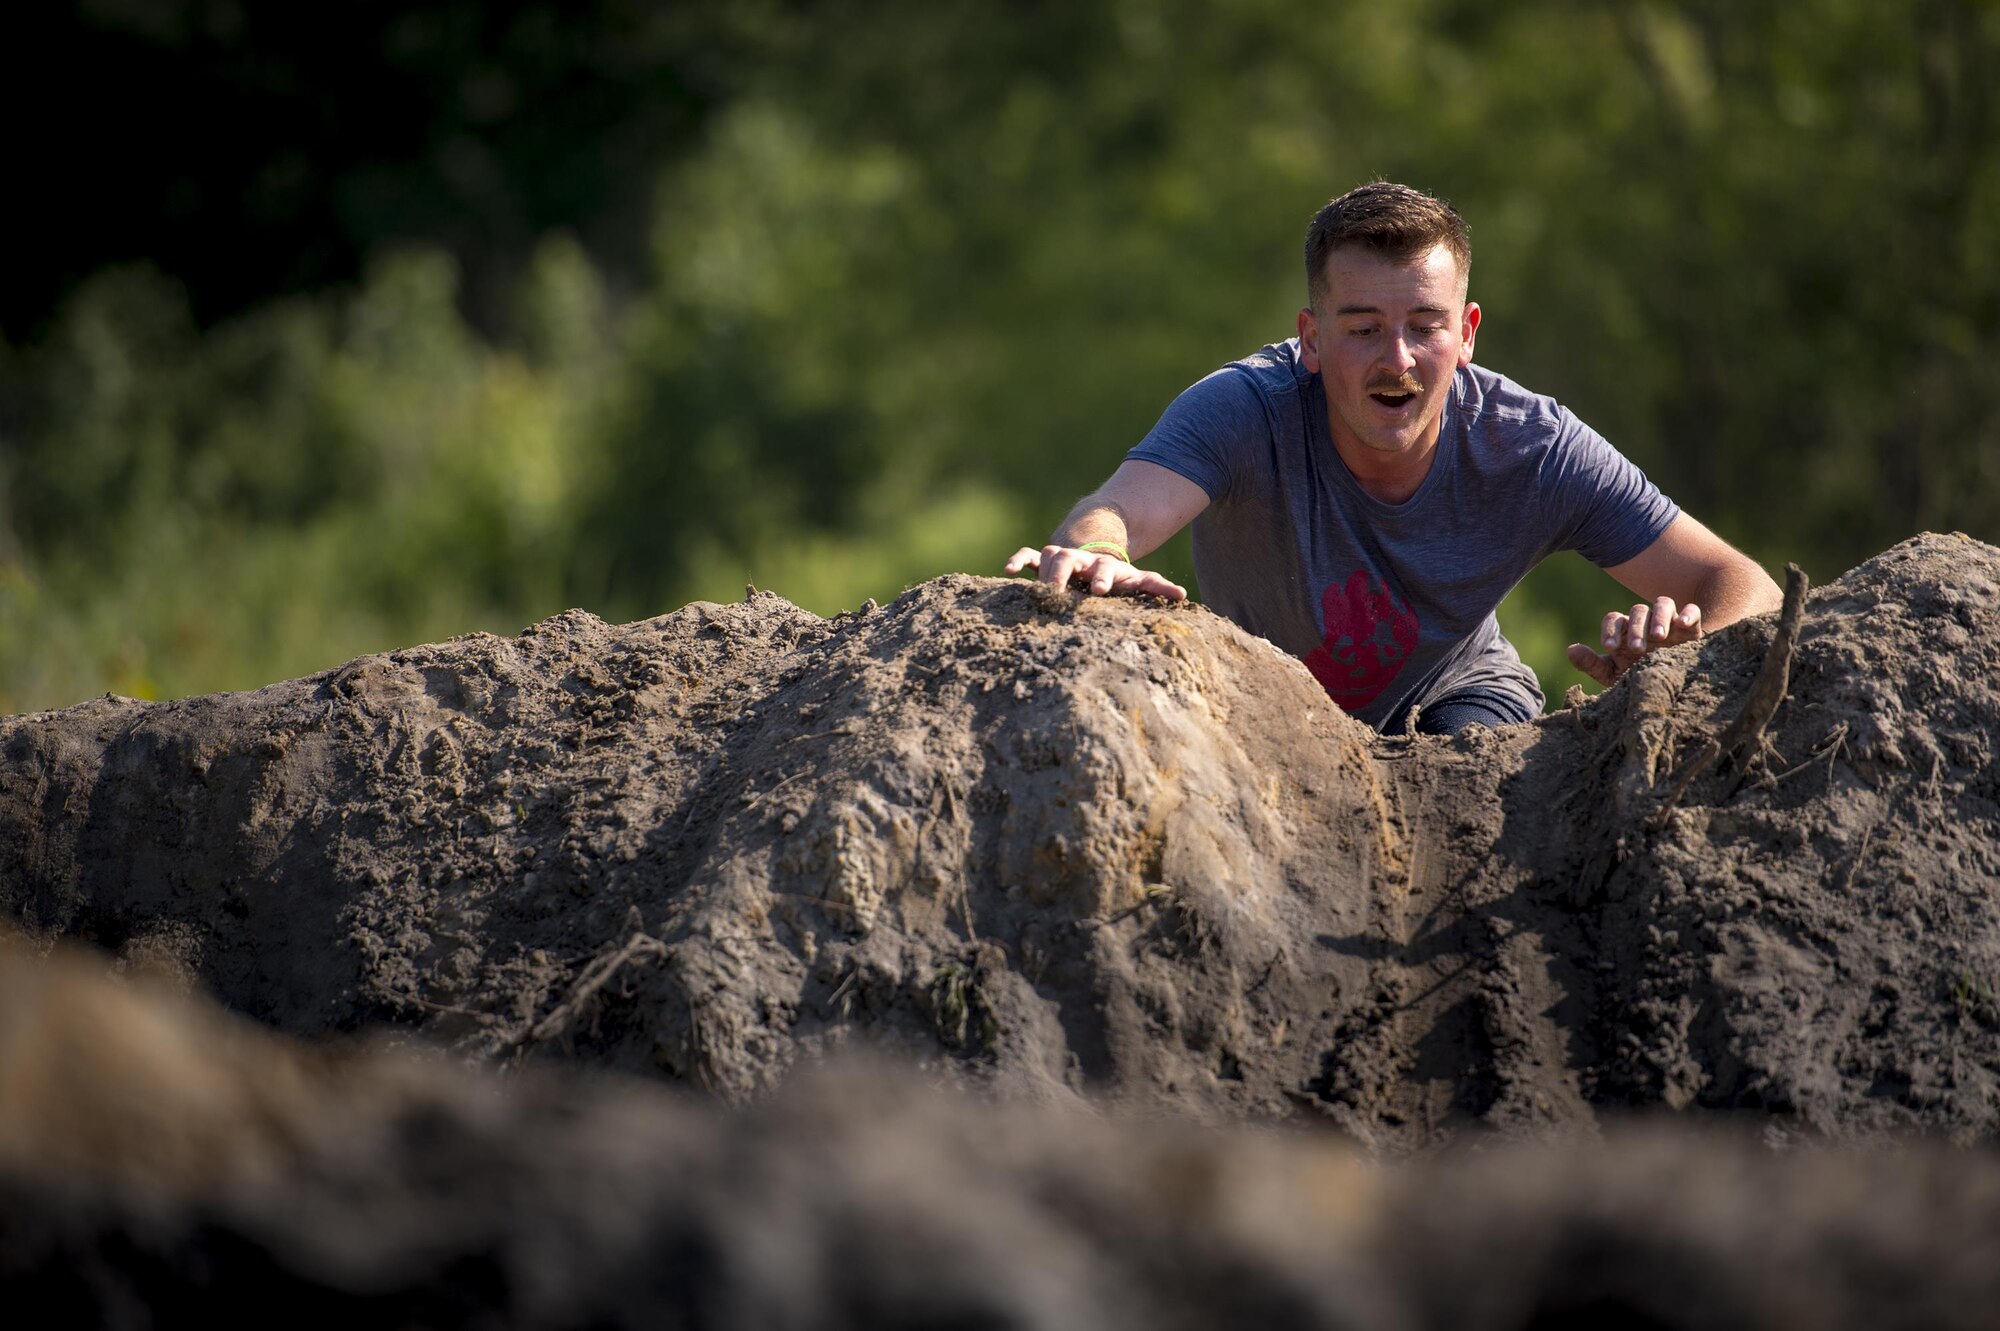 A runner looks over the top of an obstacle during the 2016 Moody Mudder, May 7, 2016, in Ray City, Ga. The Mudder challenged nearly 500 competitors to complete 20 obstacles on a 3.12-mile course for the third year in a row. (U.S. Air Force photo by Senior Airman Ryan Callaghan/Released)